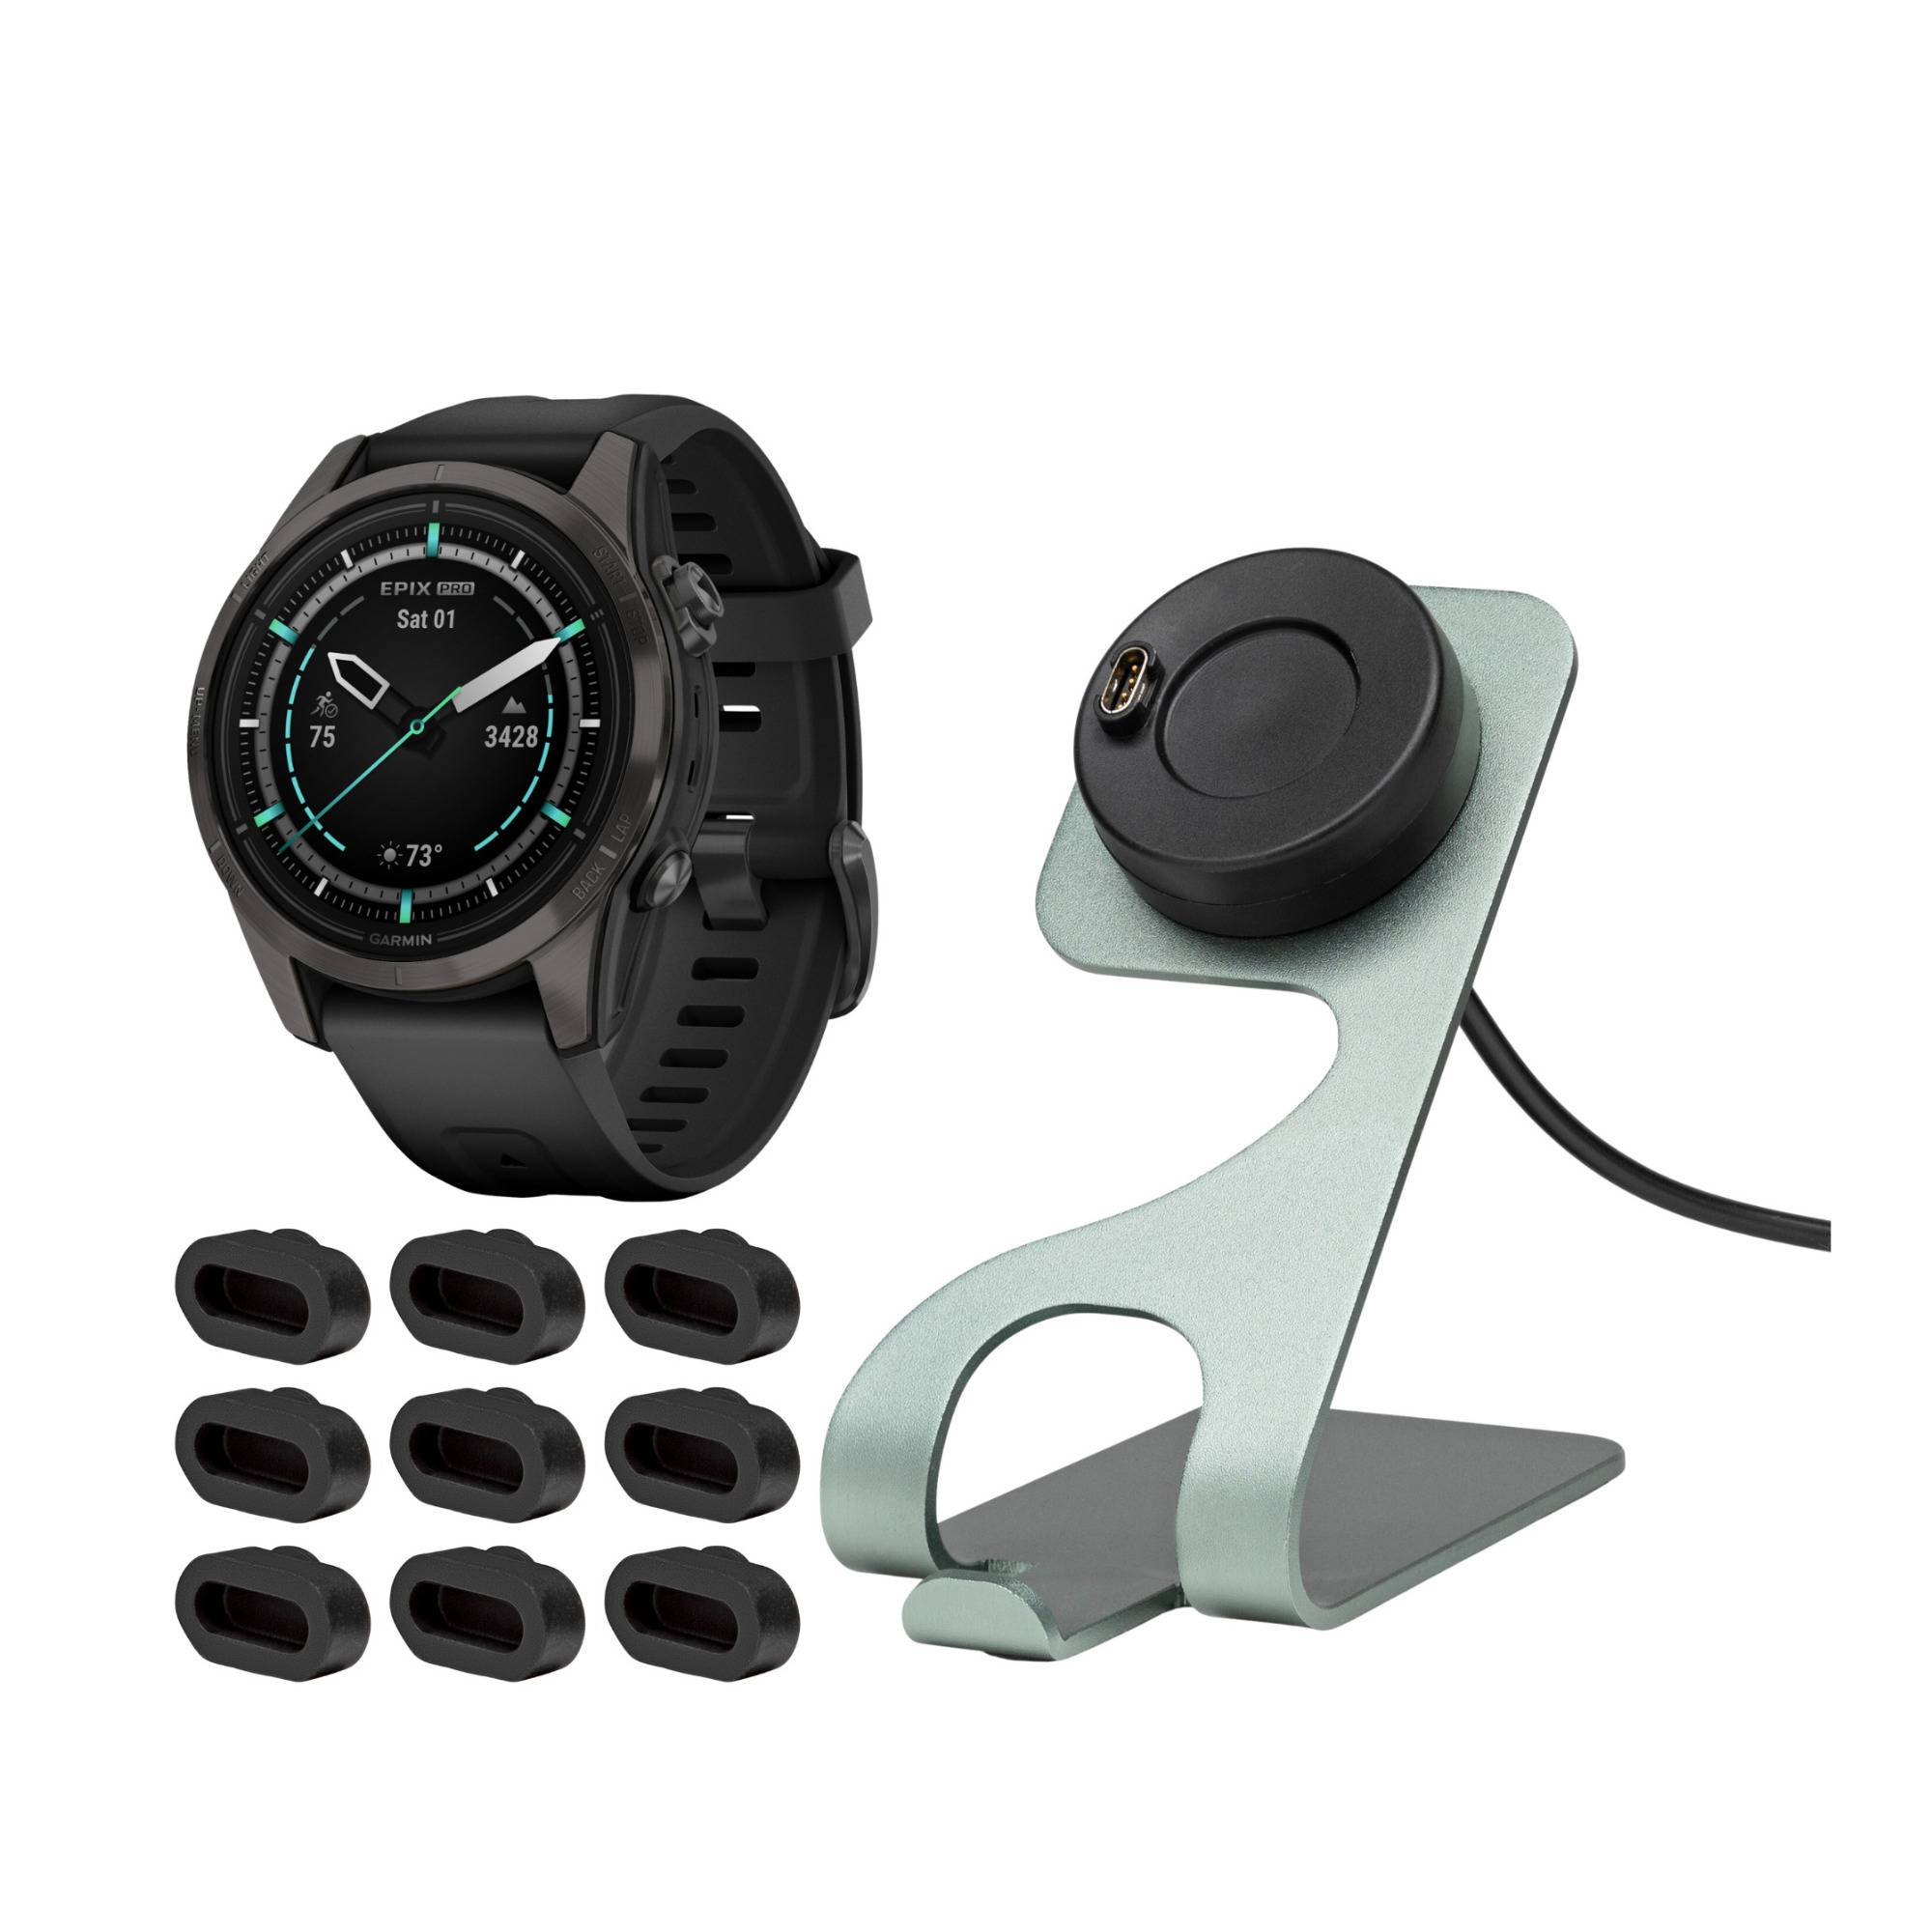 Garmin epix Pro Gen 2 Sapphire Edition Smartwatch (Carbon Gray) with Charging Stand and Port Plugs